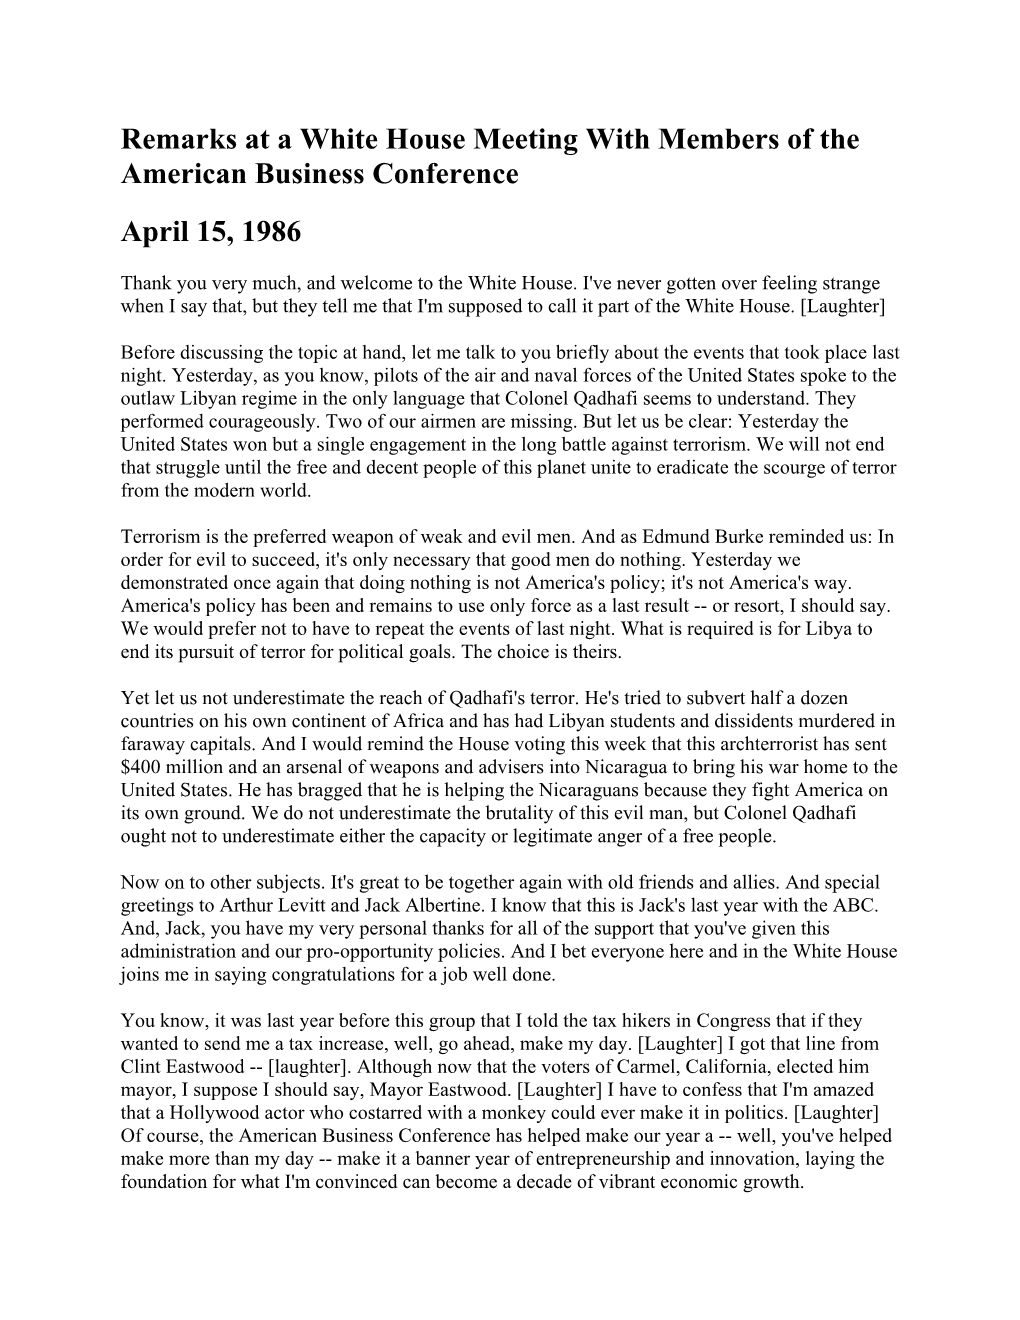 Remarks at a White House Meeting with Members of the American Business Conference April 15, 1986